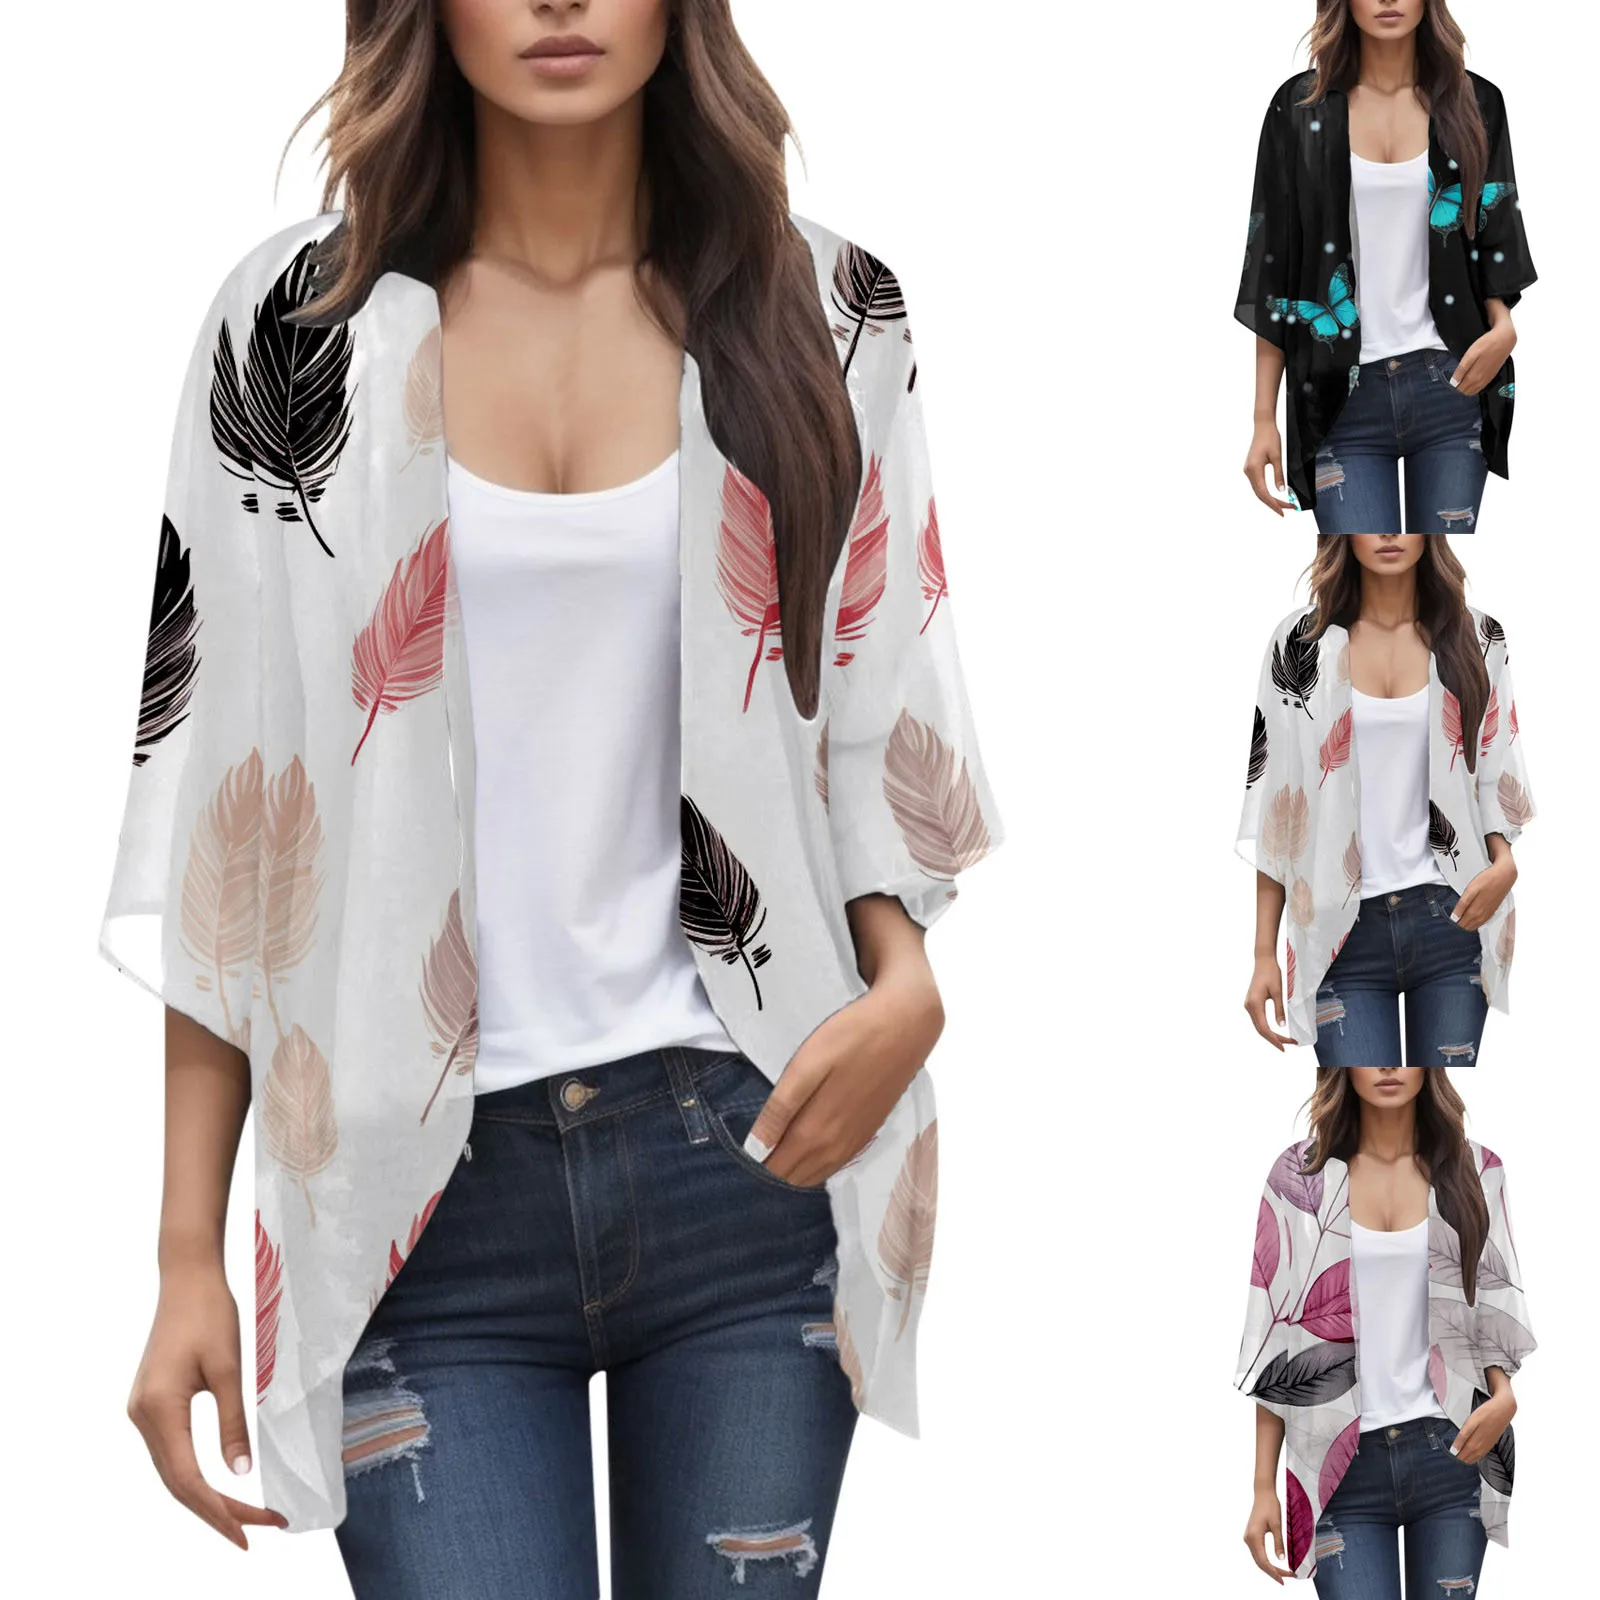 Floral Print Chiffon Cardigan Women's Puff Sleeve Loose Cover Up Oversized Female Casual T-shirt Blouse Fashion Tops Clothing